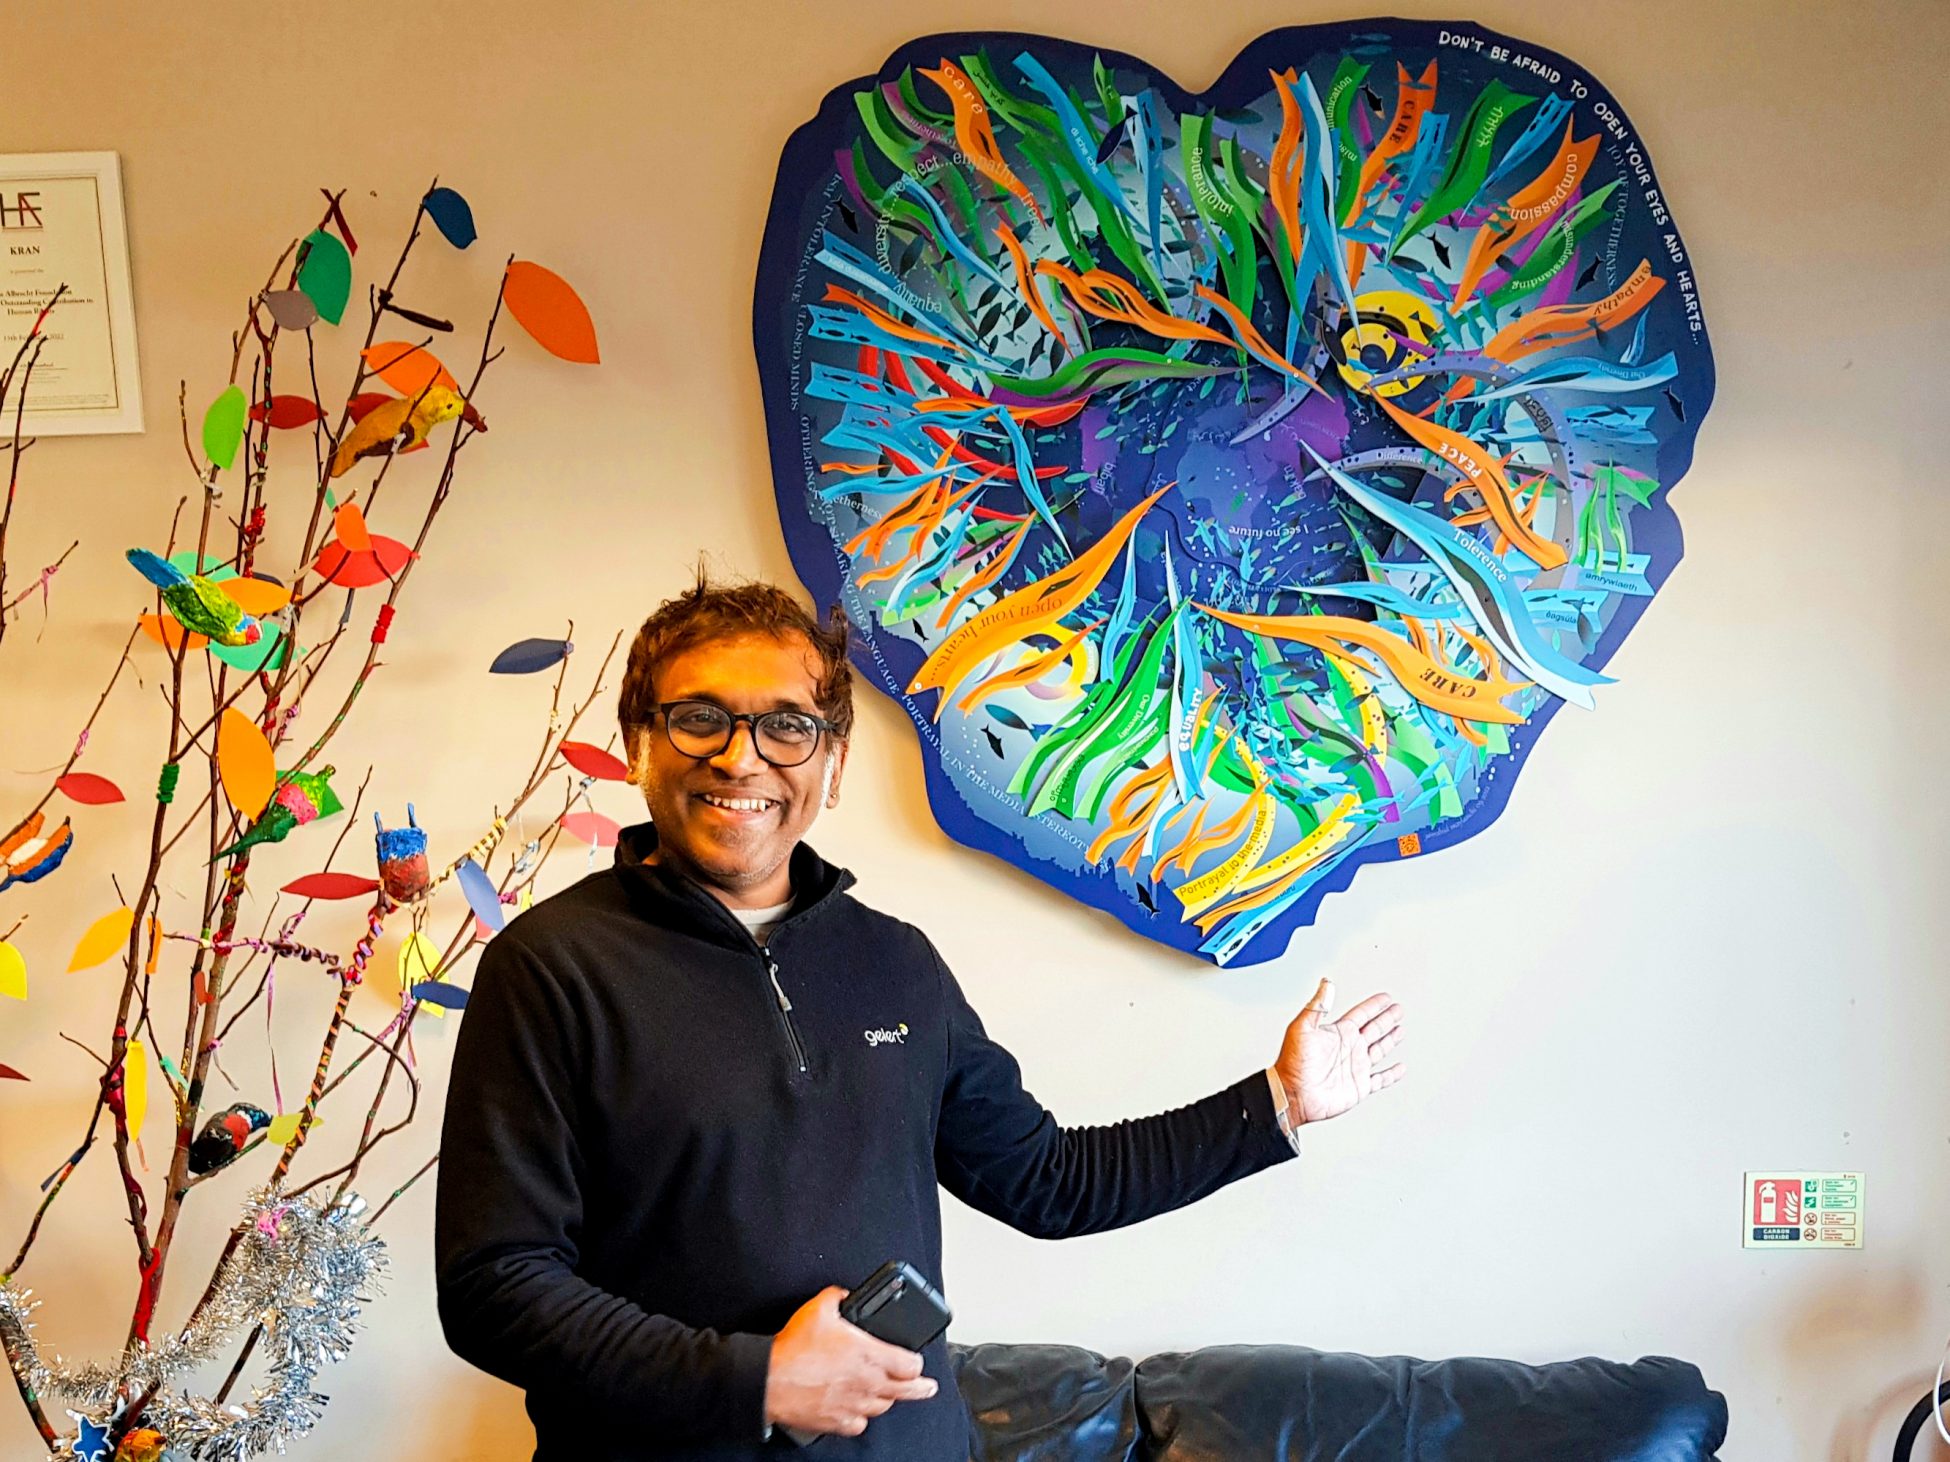 A photo of artist Jamshid Maylanchi standing in front of the heart shaped artwork and gesturing towards it whilst smiling at the camera.